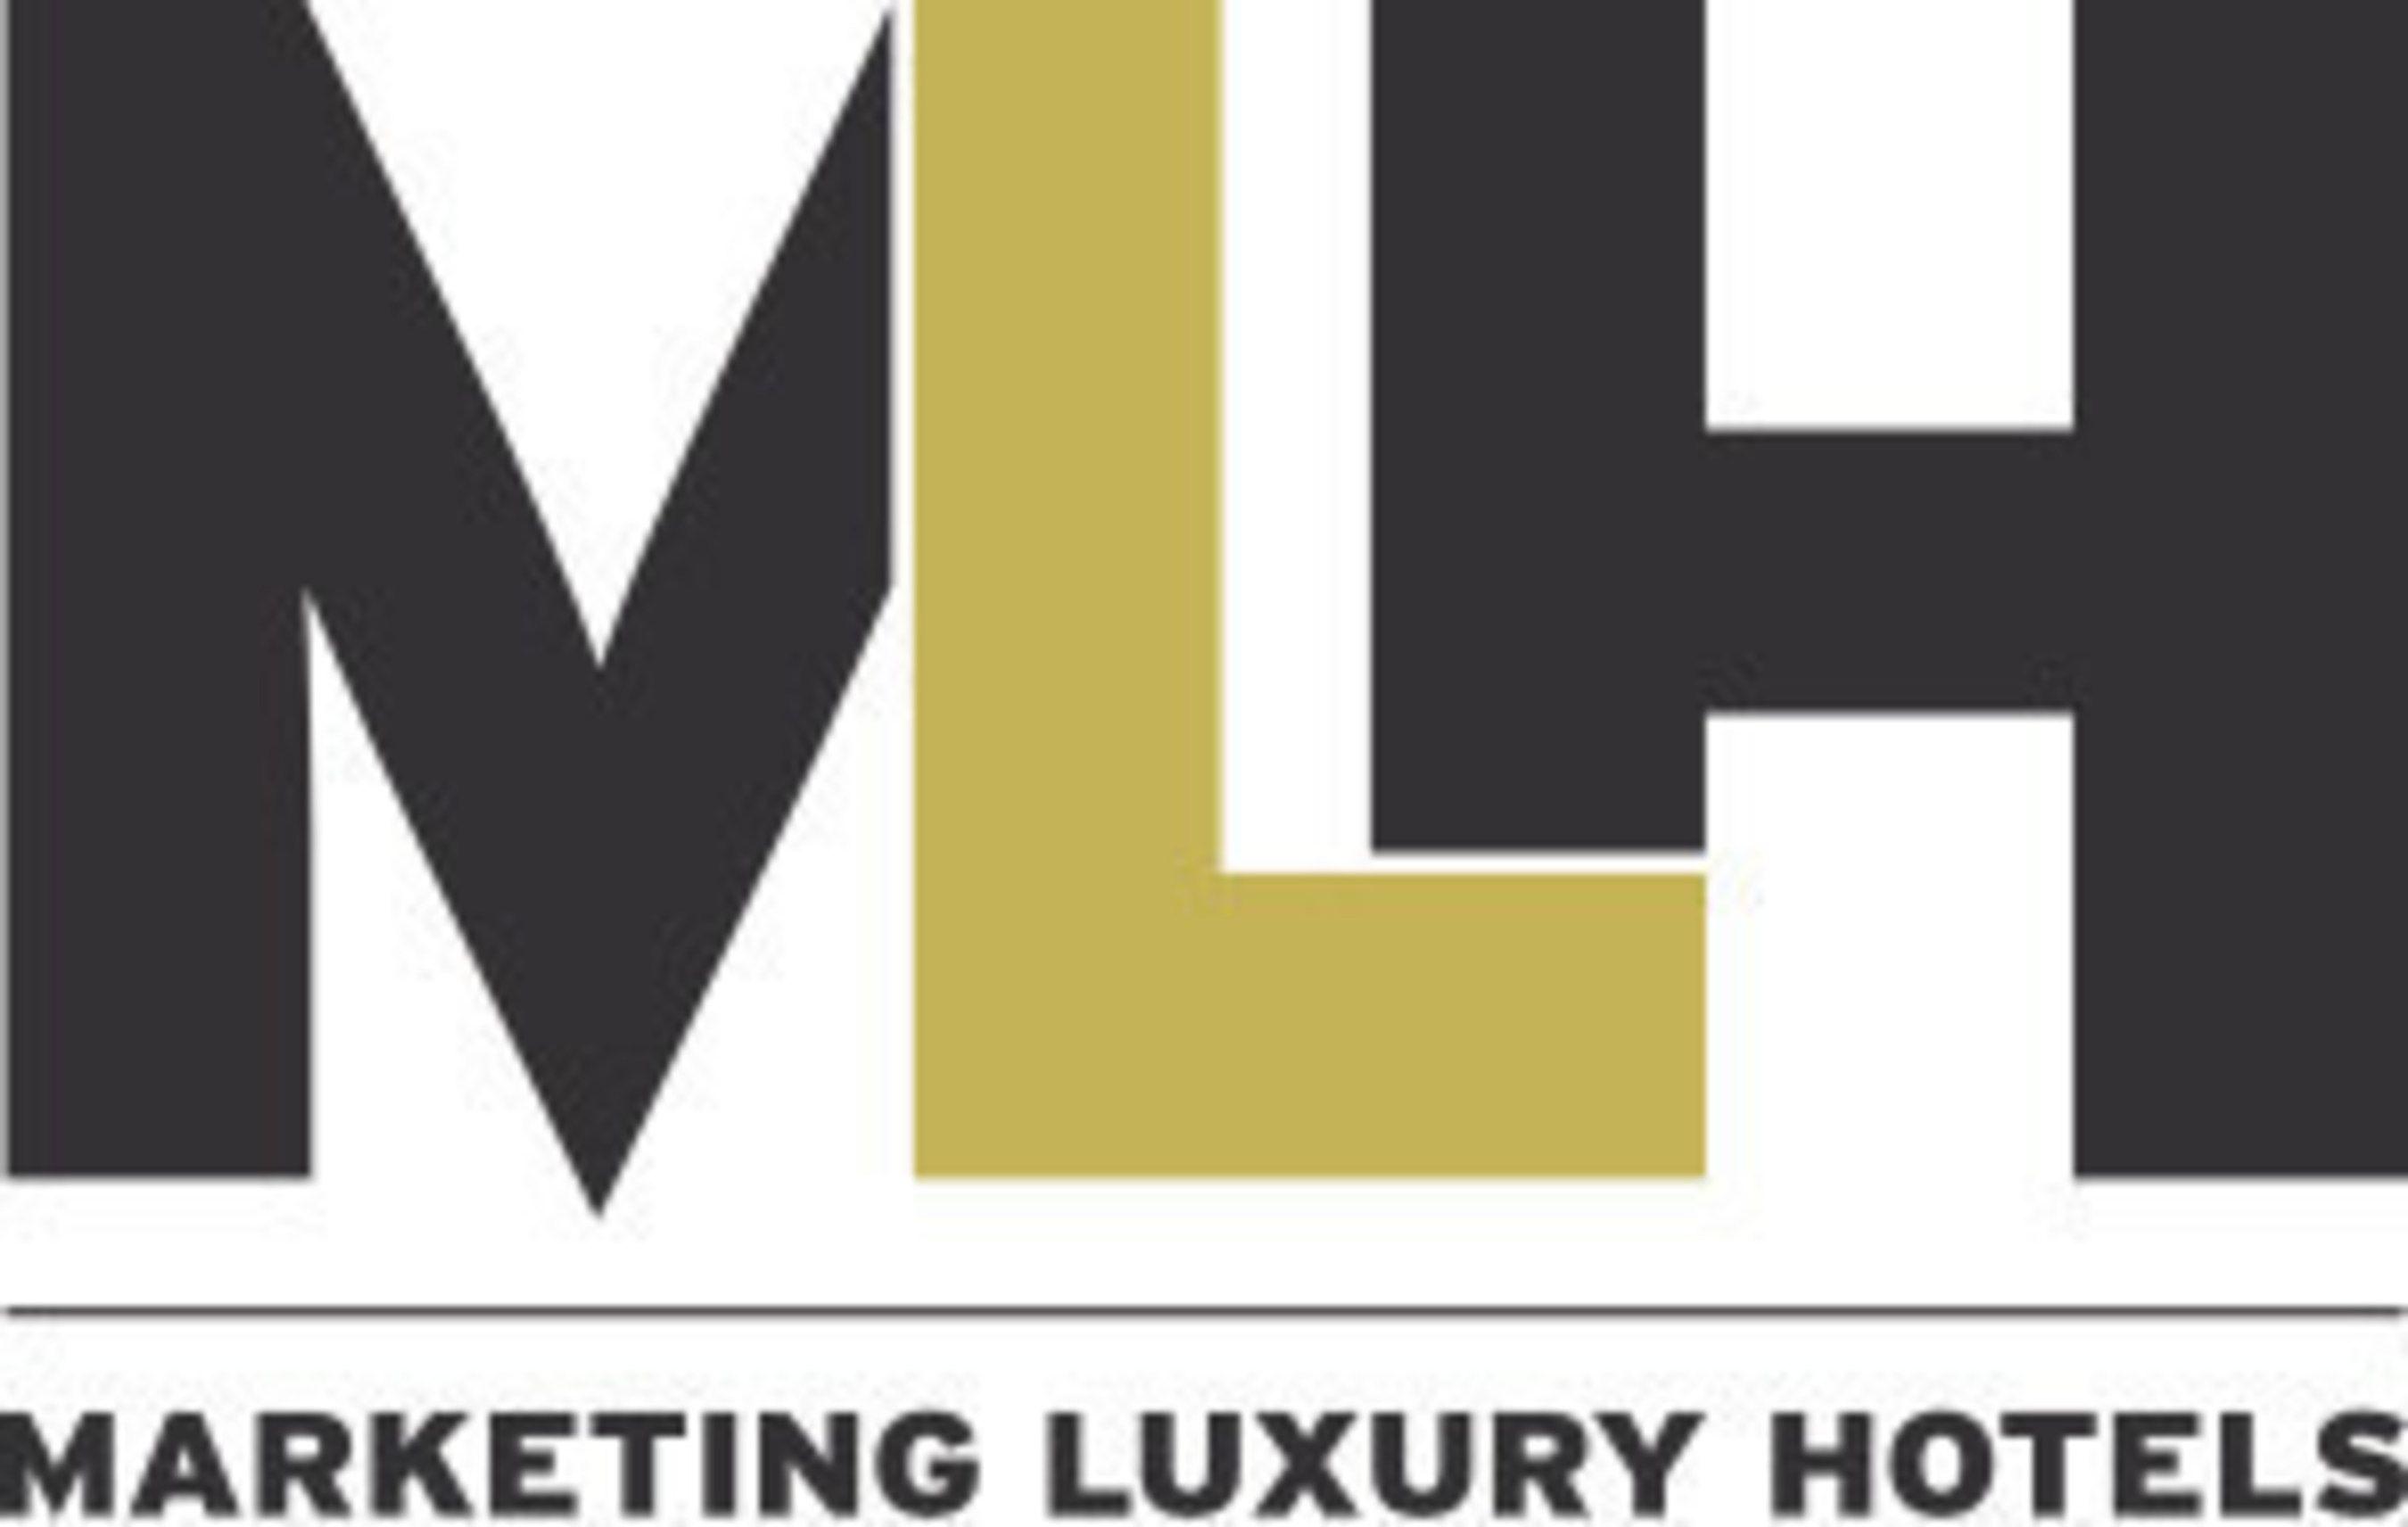 European Hotels Logo - New Hotel Marketing Agency Launched to Help European Luxury Hotels ...